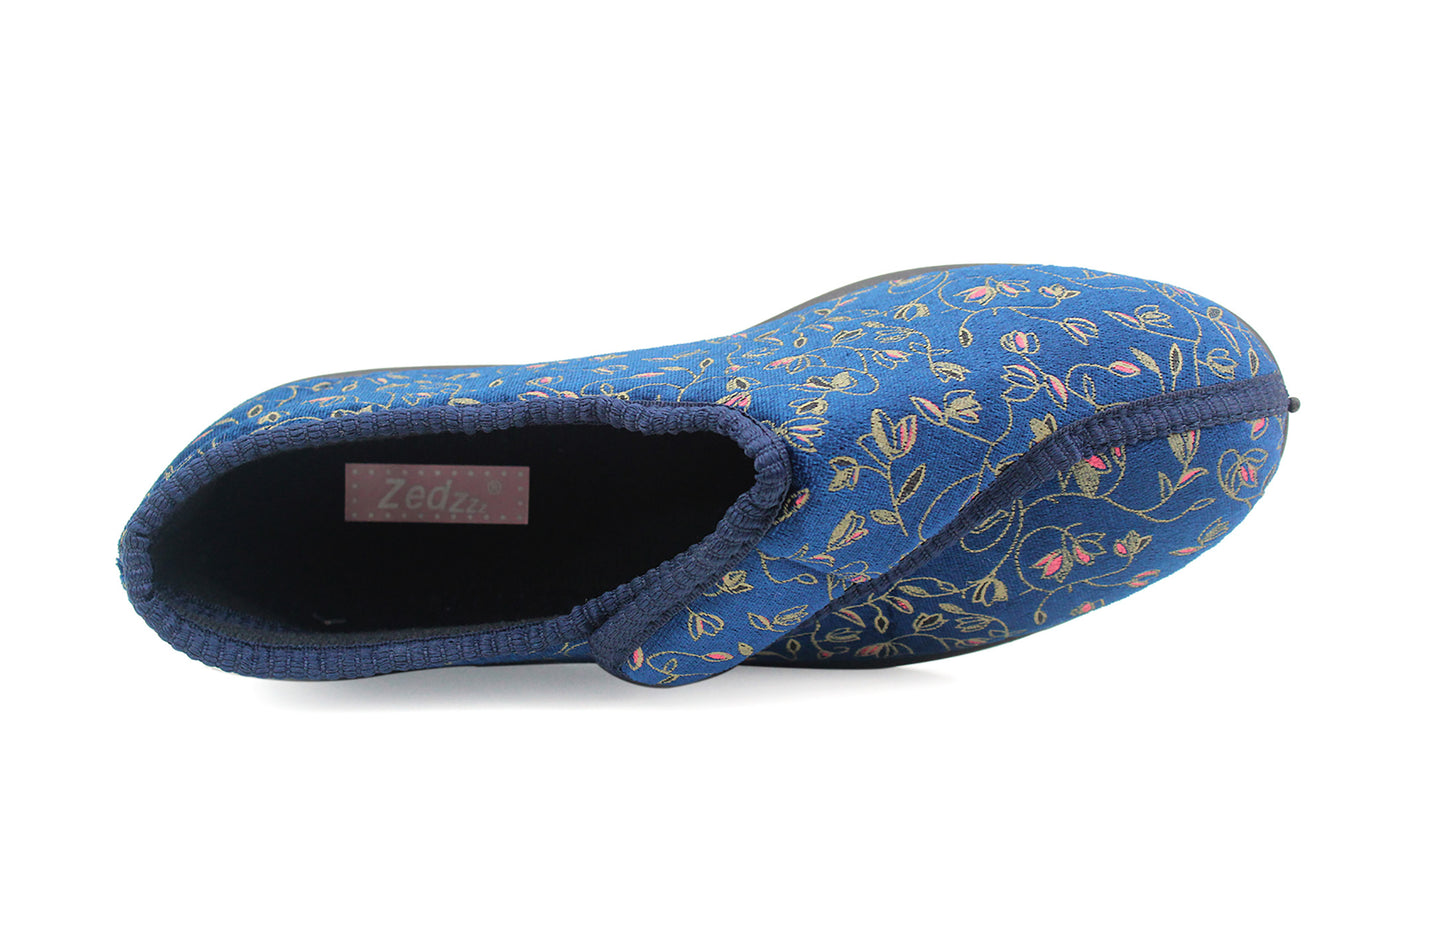 Womens Ladies Diabetic Orthopedic Washable Navy Floral Velour Comfort Wide Opening Touch Fasten Slippers